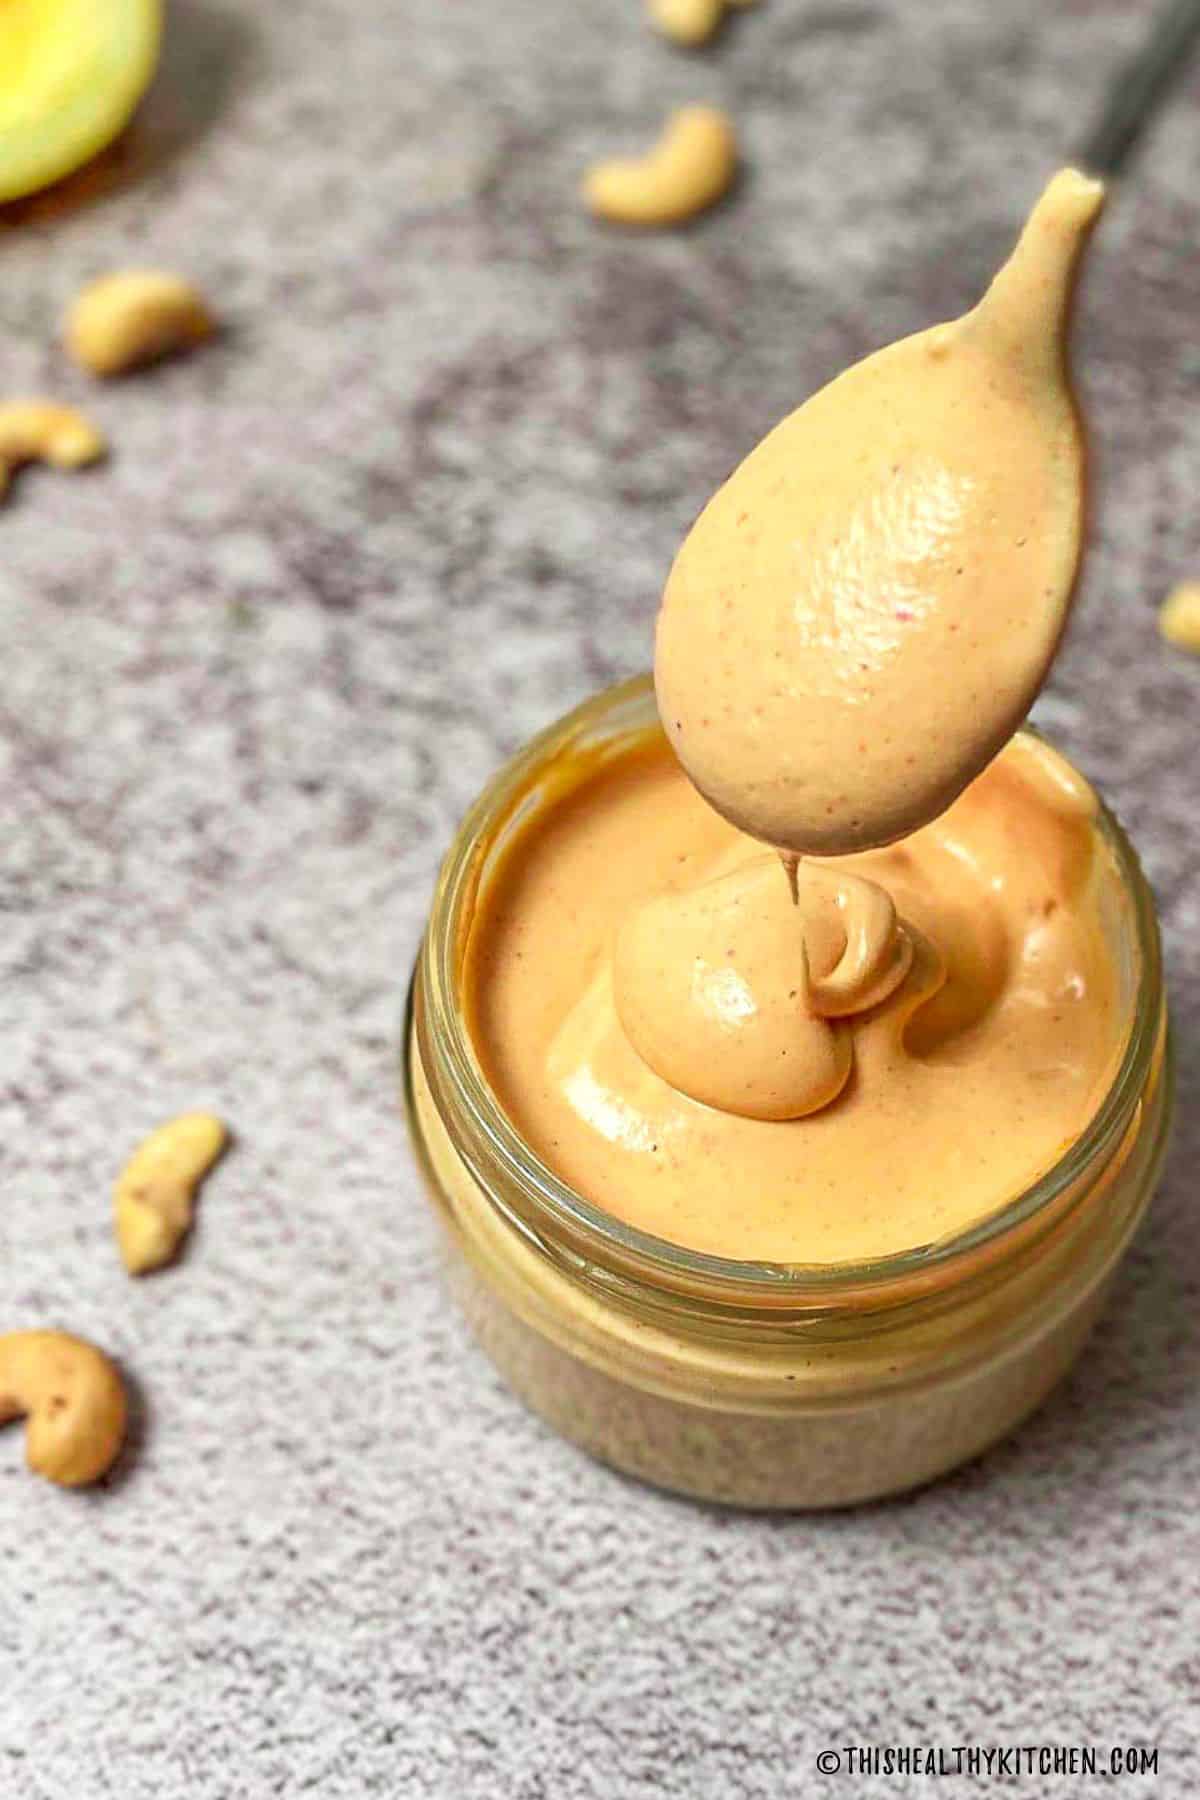 Spoonful of spicy vegan mayo being held above jar of mayo.